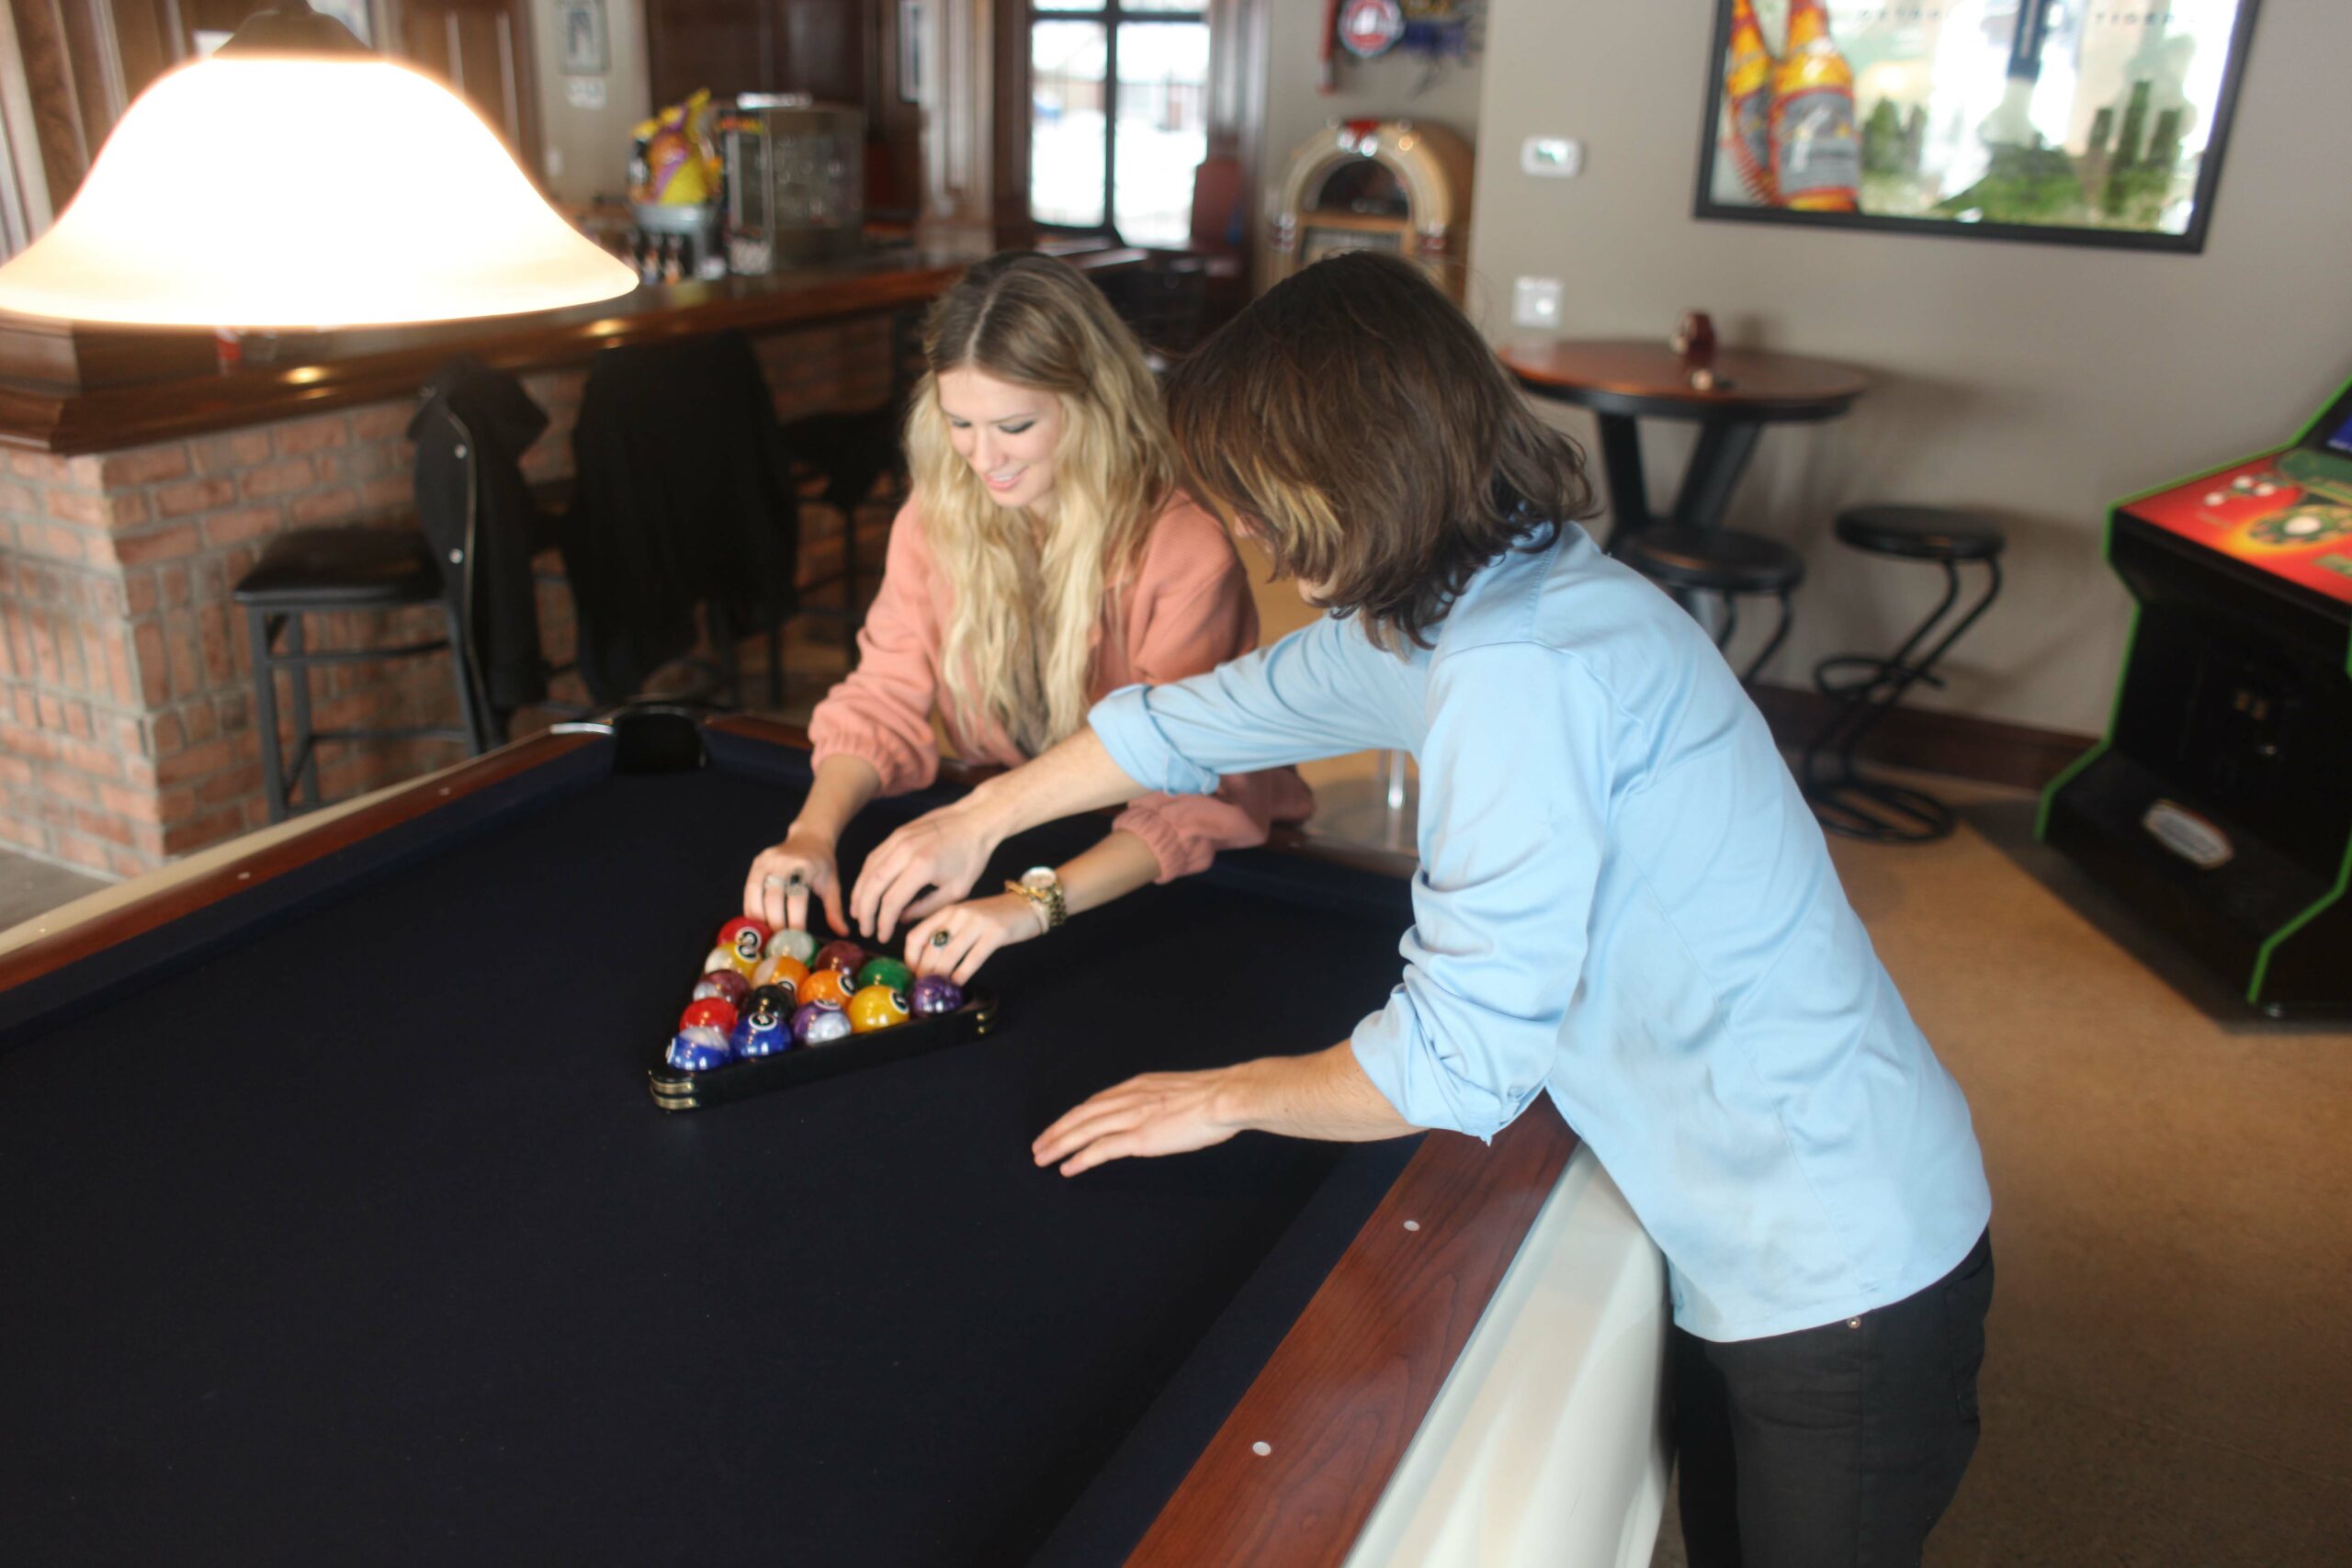 Two women racking a set of billiard balls getting ready for a game of 8 ball.